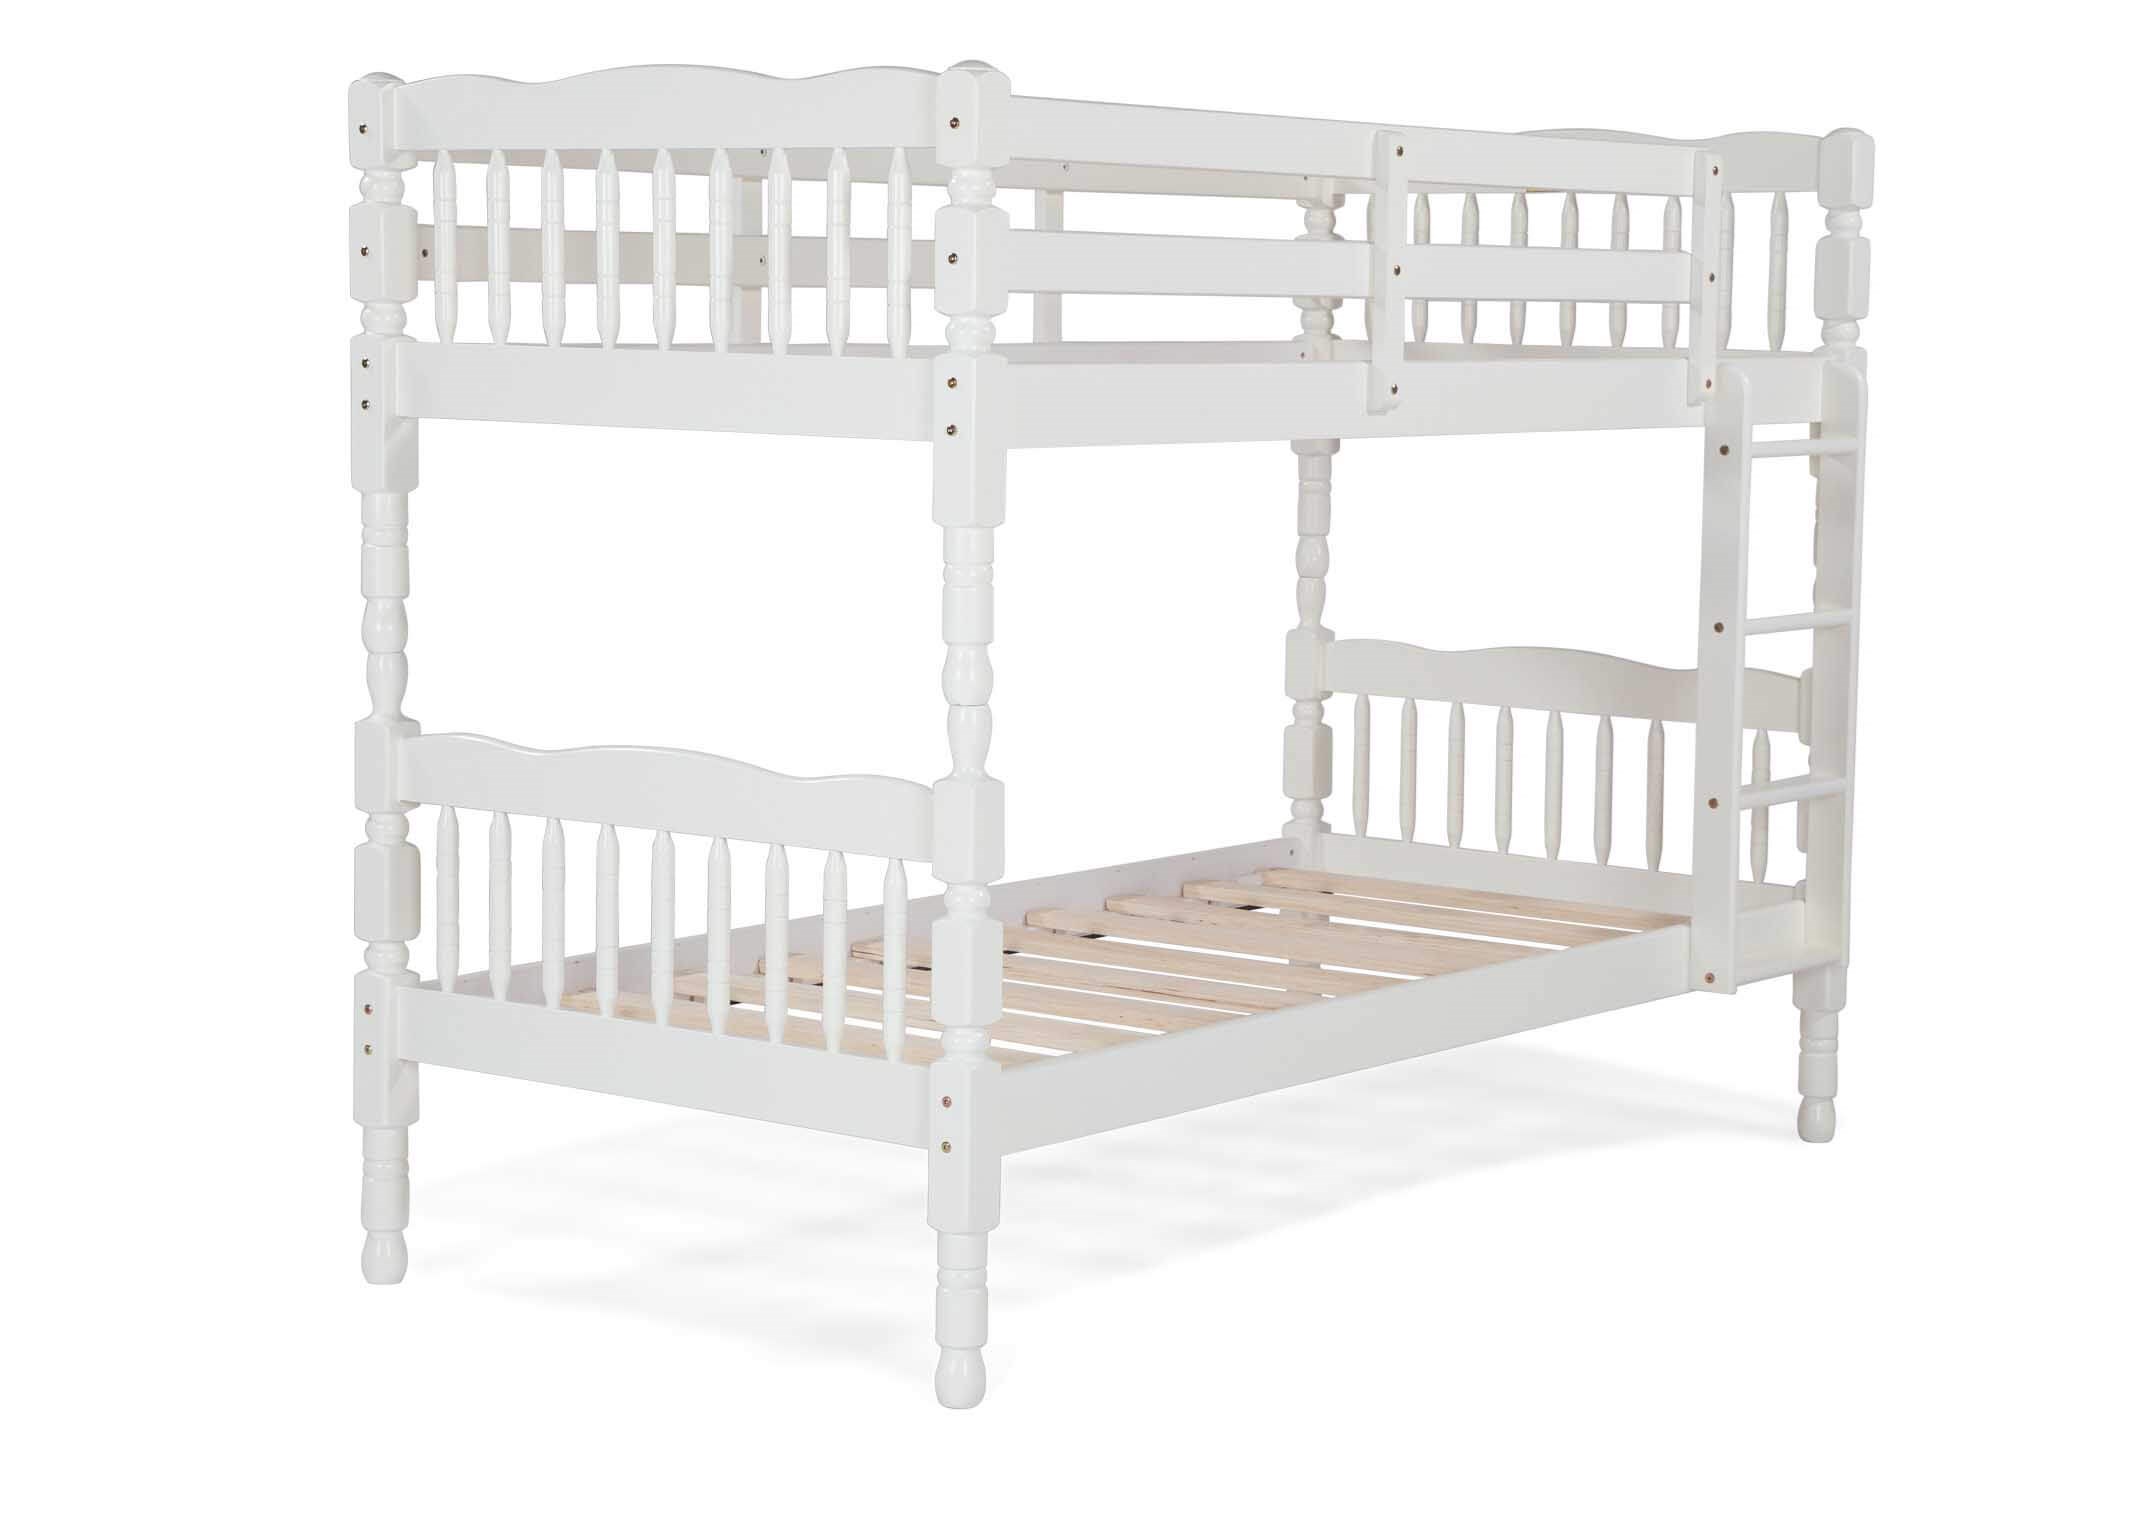 3 Ft White Painted Bunk Bed Austin, 3 In 1 Bunk Bed